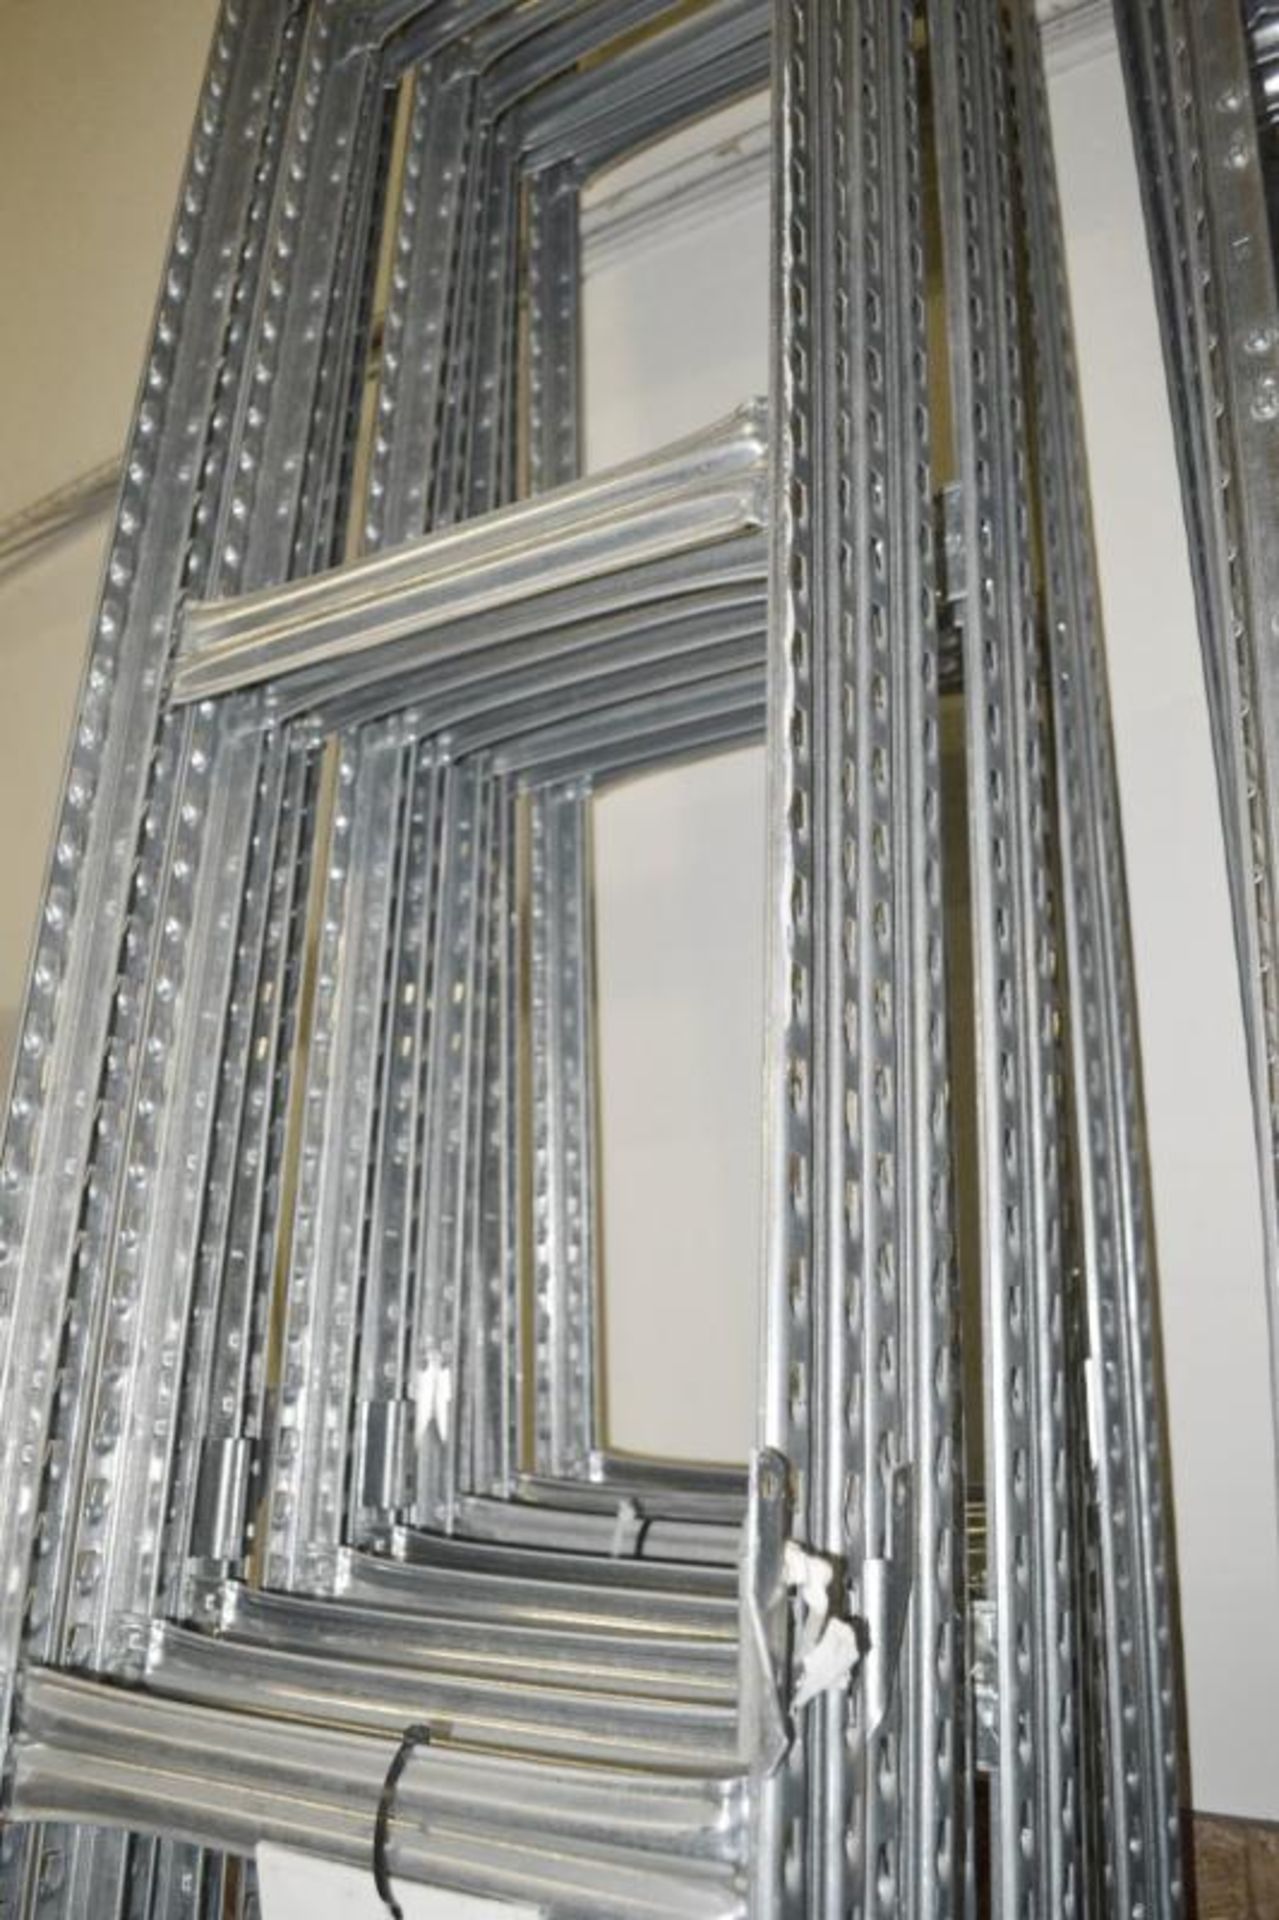 4 x Bays of Metalsistem Steel Modular Storage Shelving - Includes 37 Pieces - Recently Removed - Image 5 of 17